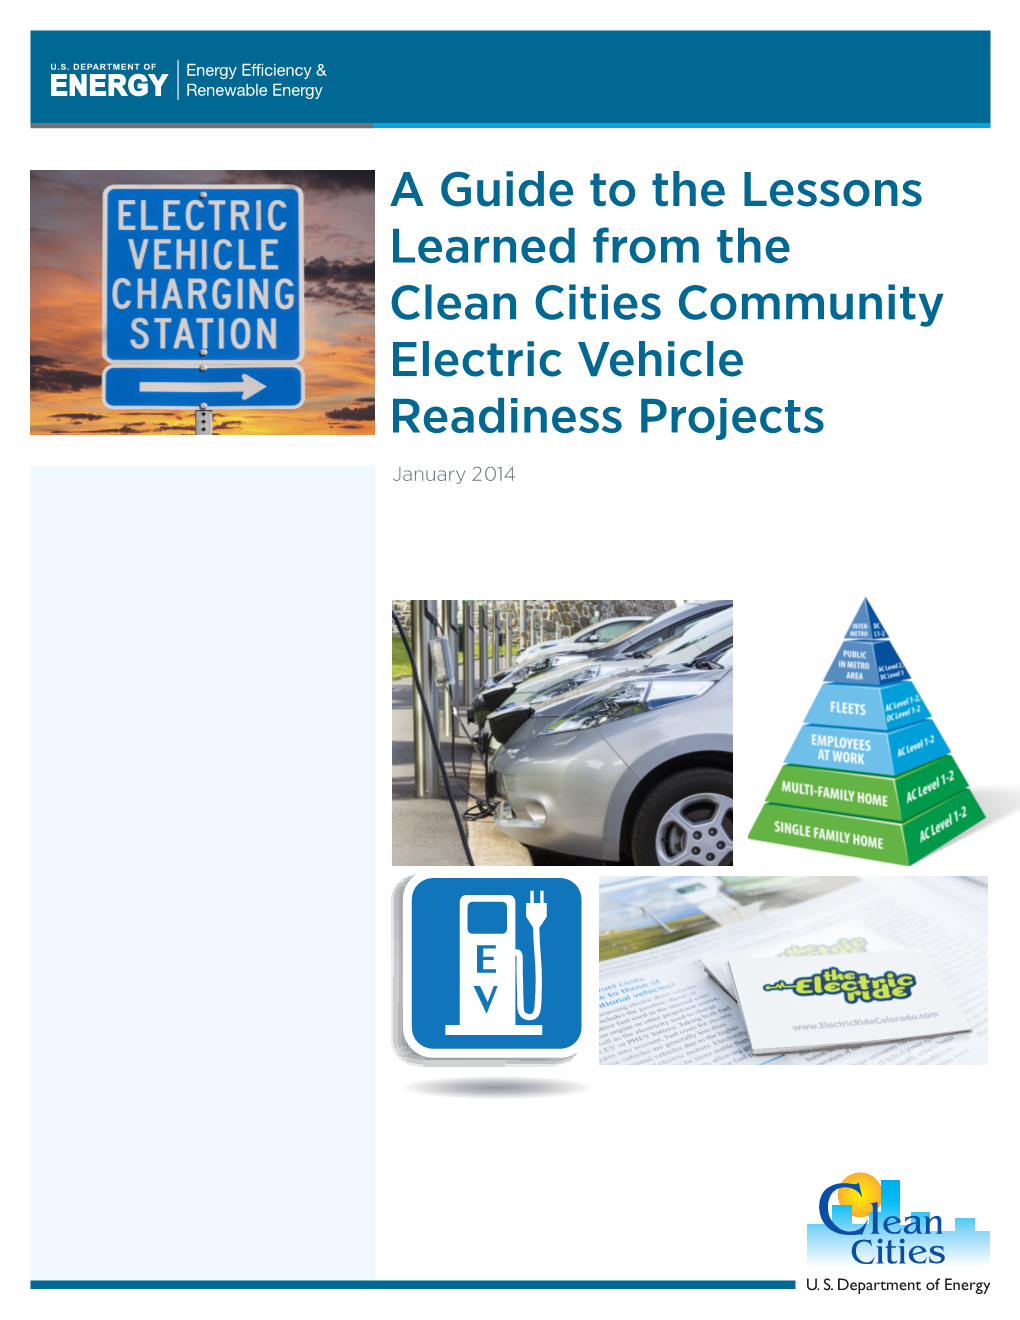 A Guide to the Lessons Learned from the Clean Cities Community Electric